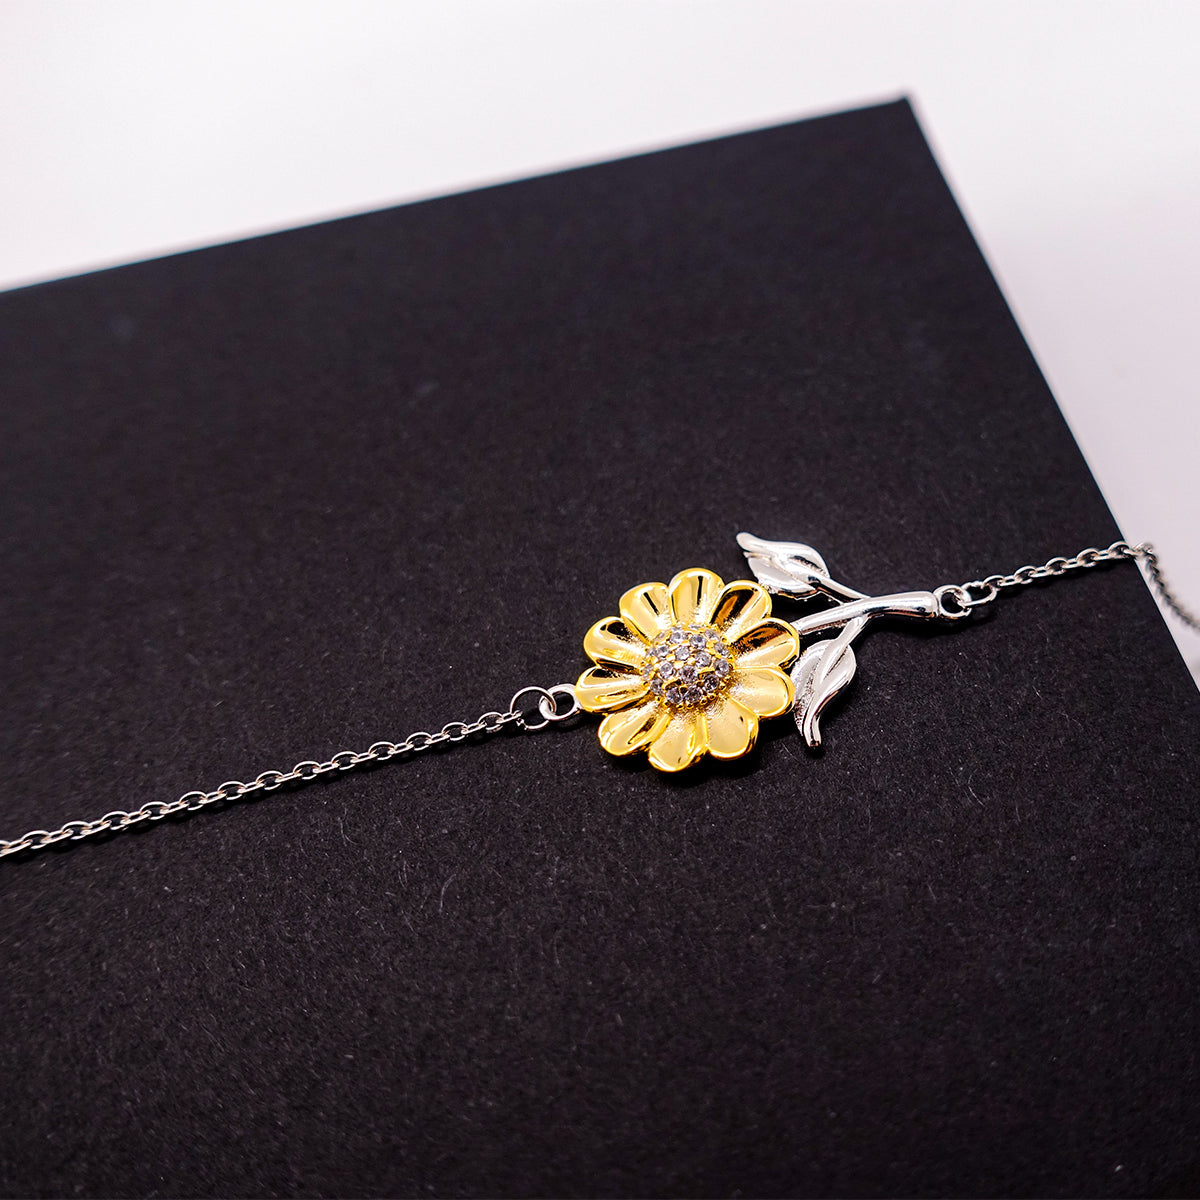 Uncle Sunflower Bracelet - Inspirational Gift for Birthday, Christmas, and Graduation - Perfect Love Casteth Out Fear - Unique Jewelry for Men